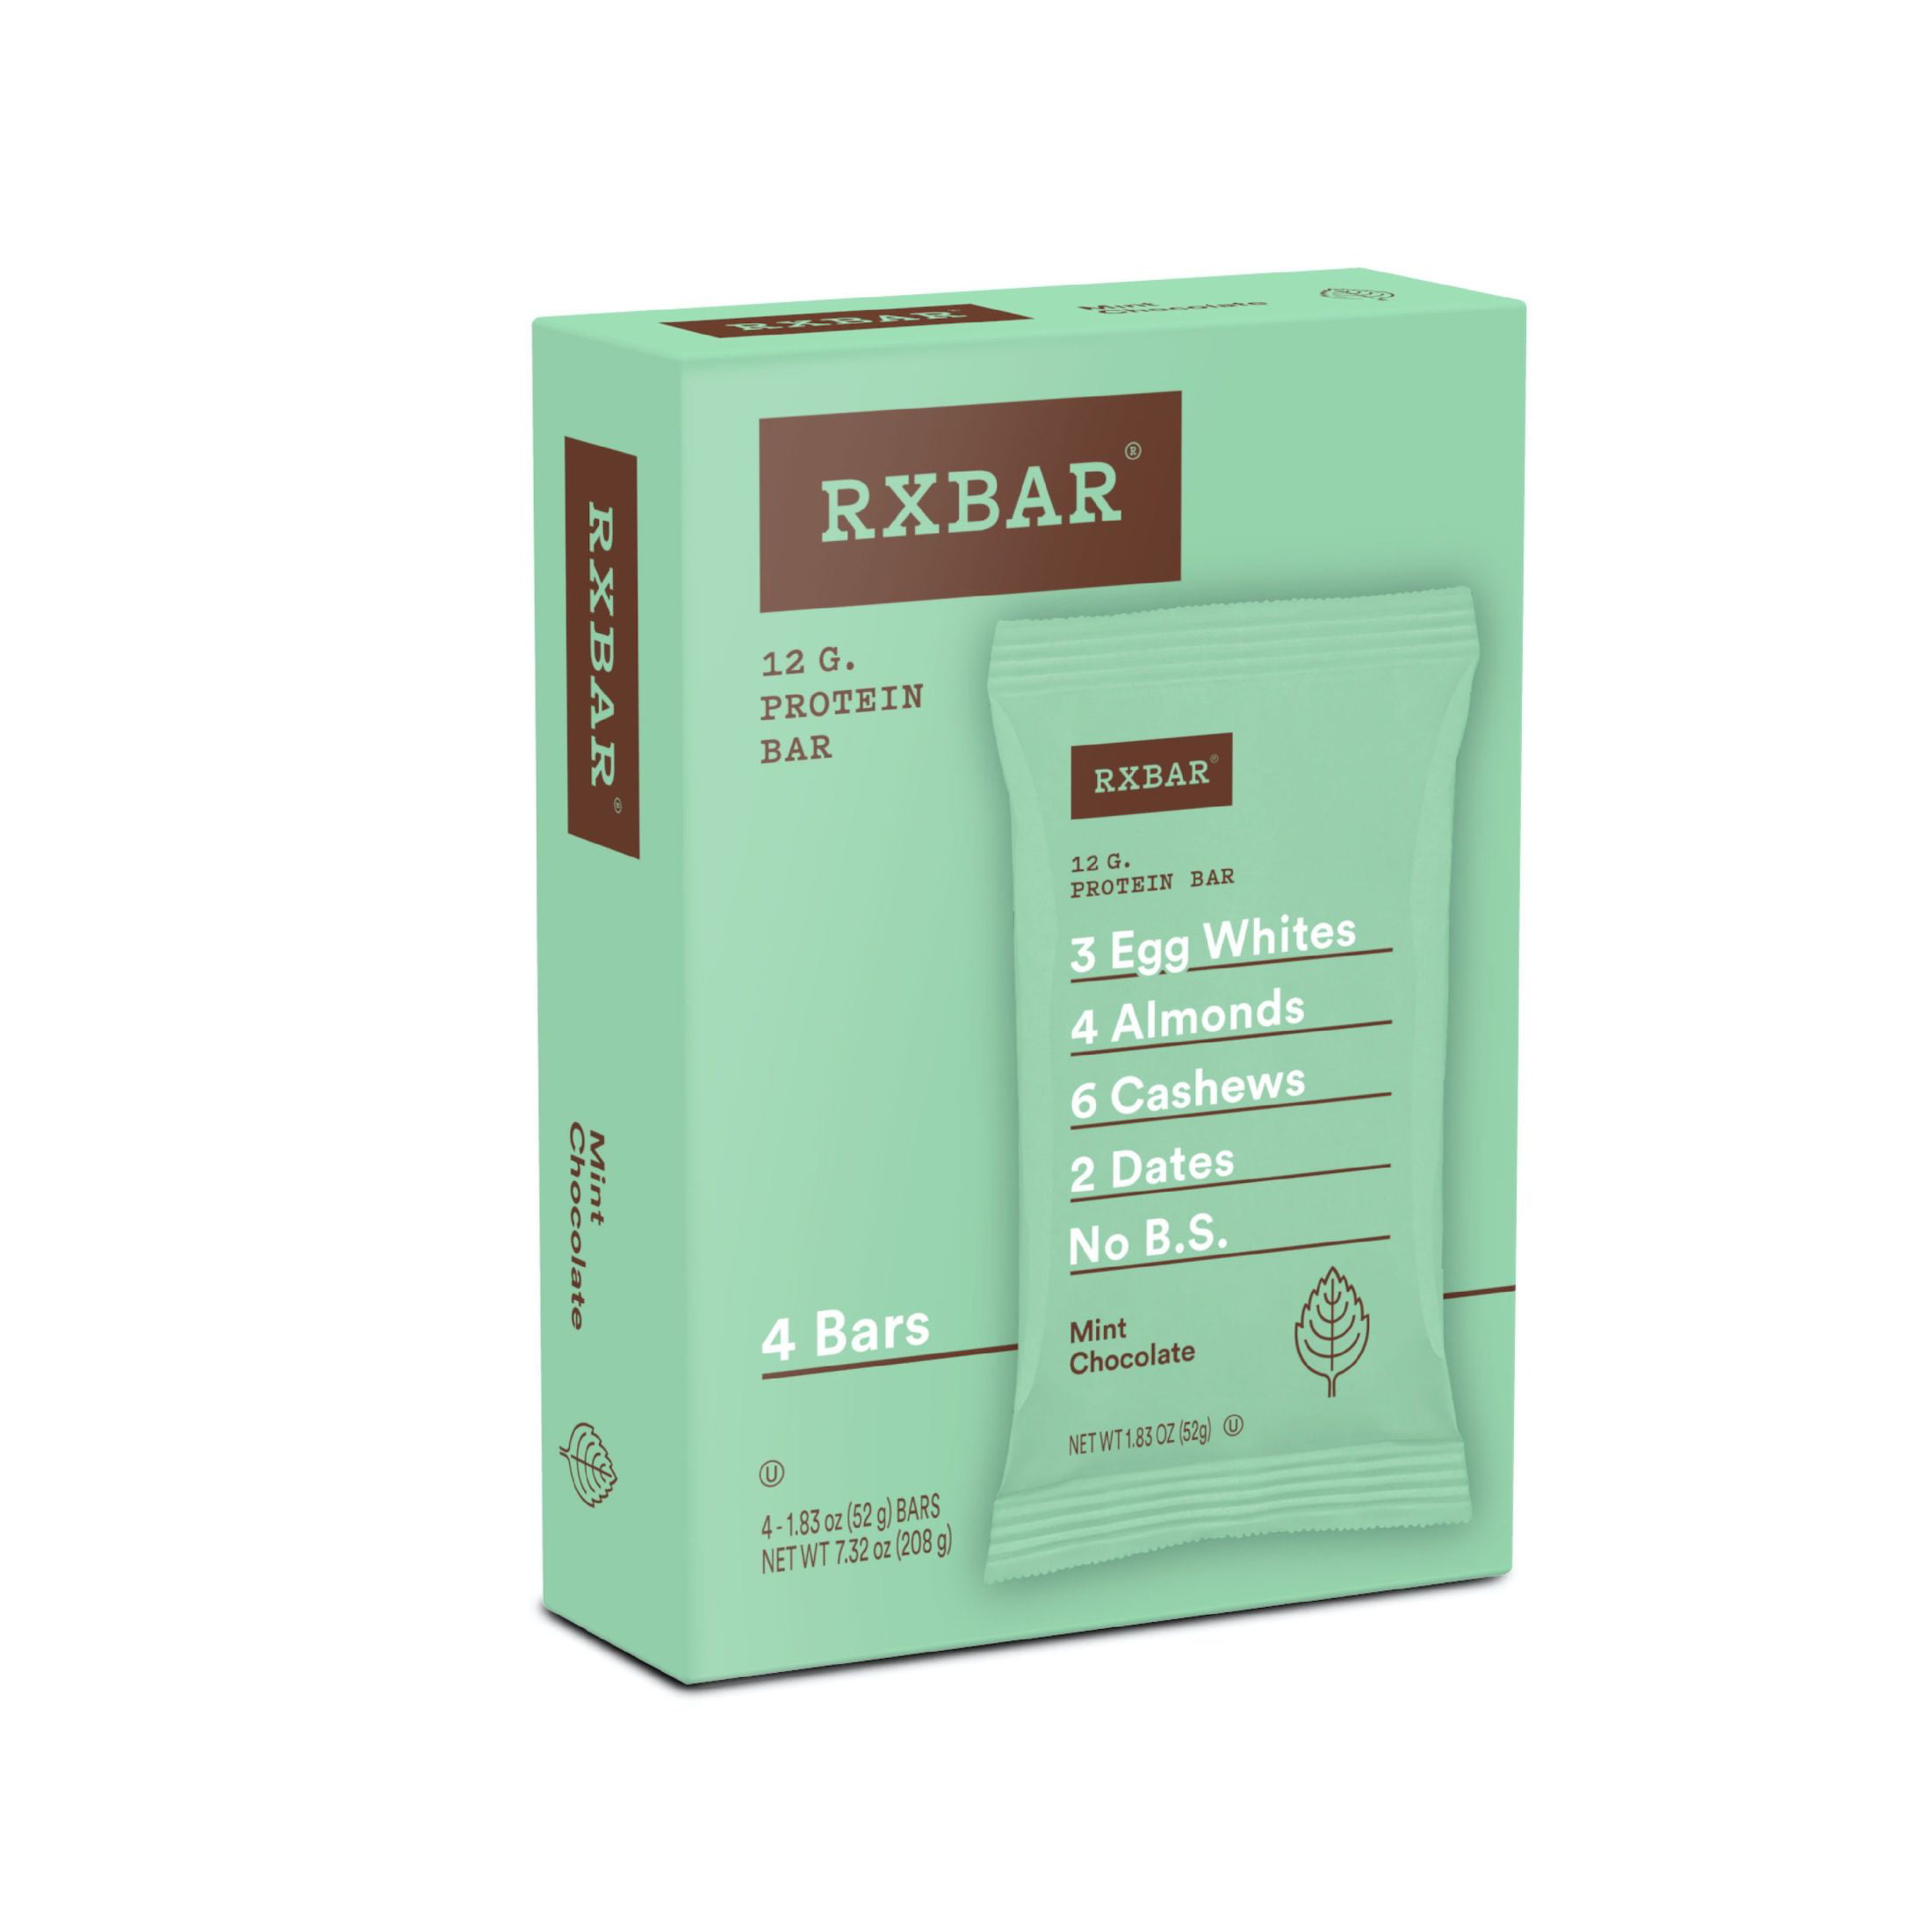 RXBAR Mint Chocolate Chewy Protein Bar, 7.32 oz, 4 Count